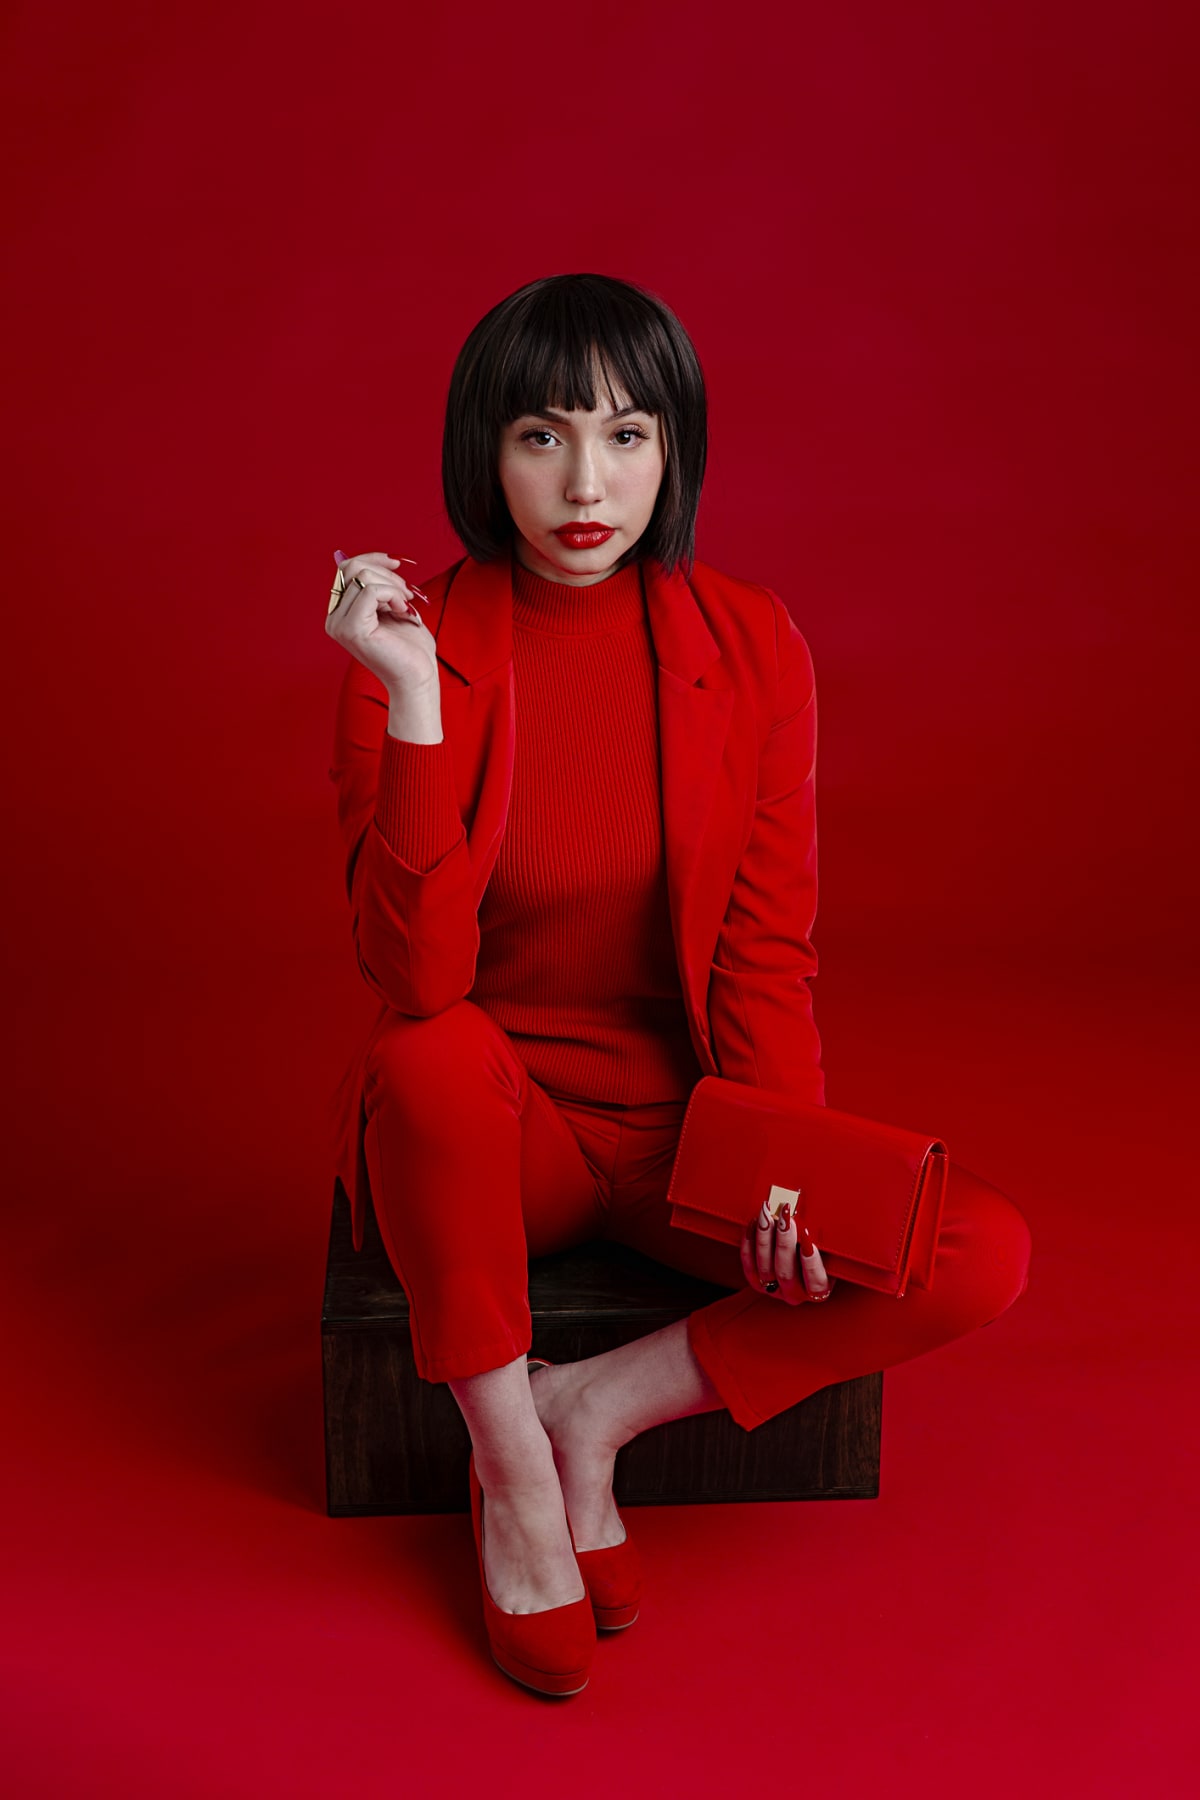 Woman wearing an all red ensemble against a red background